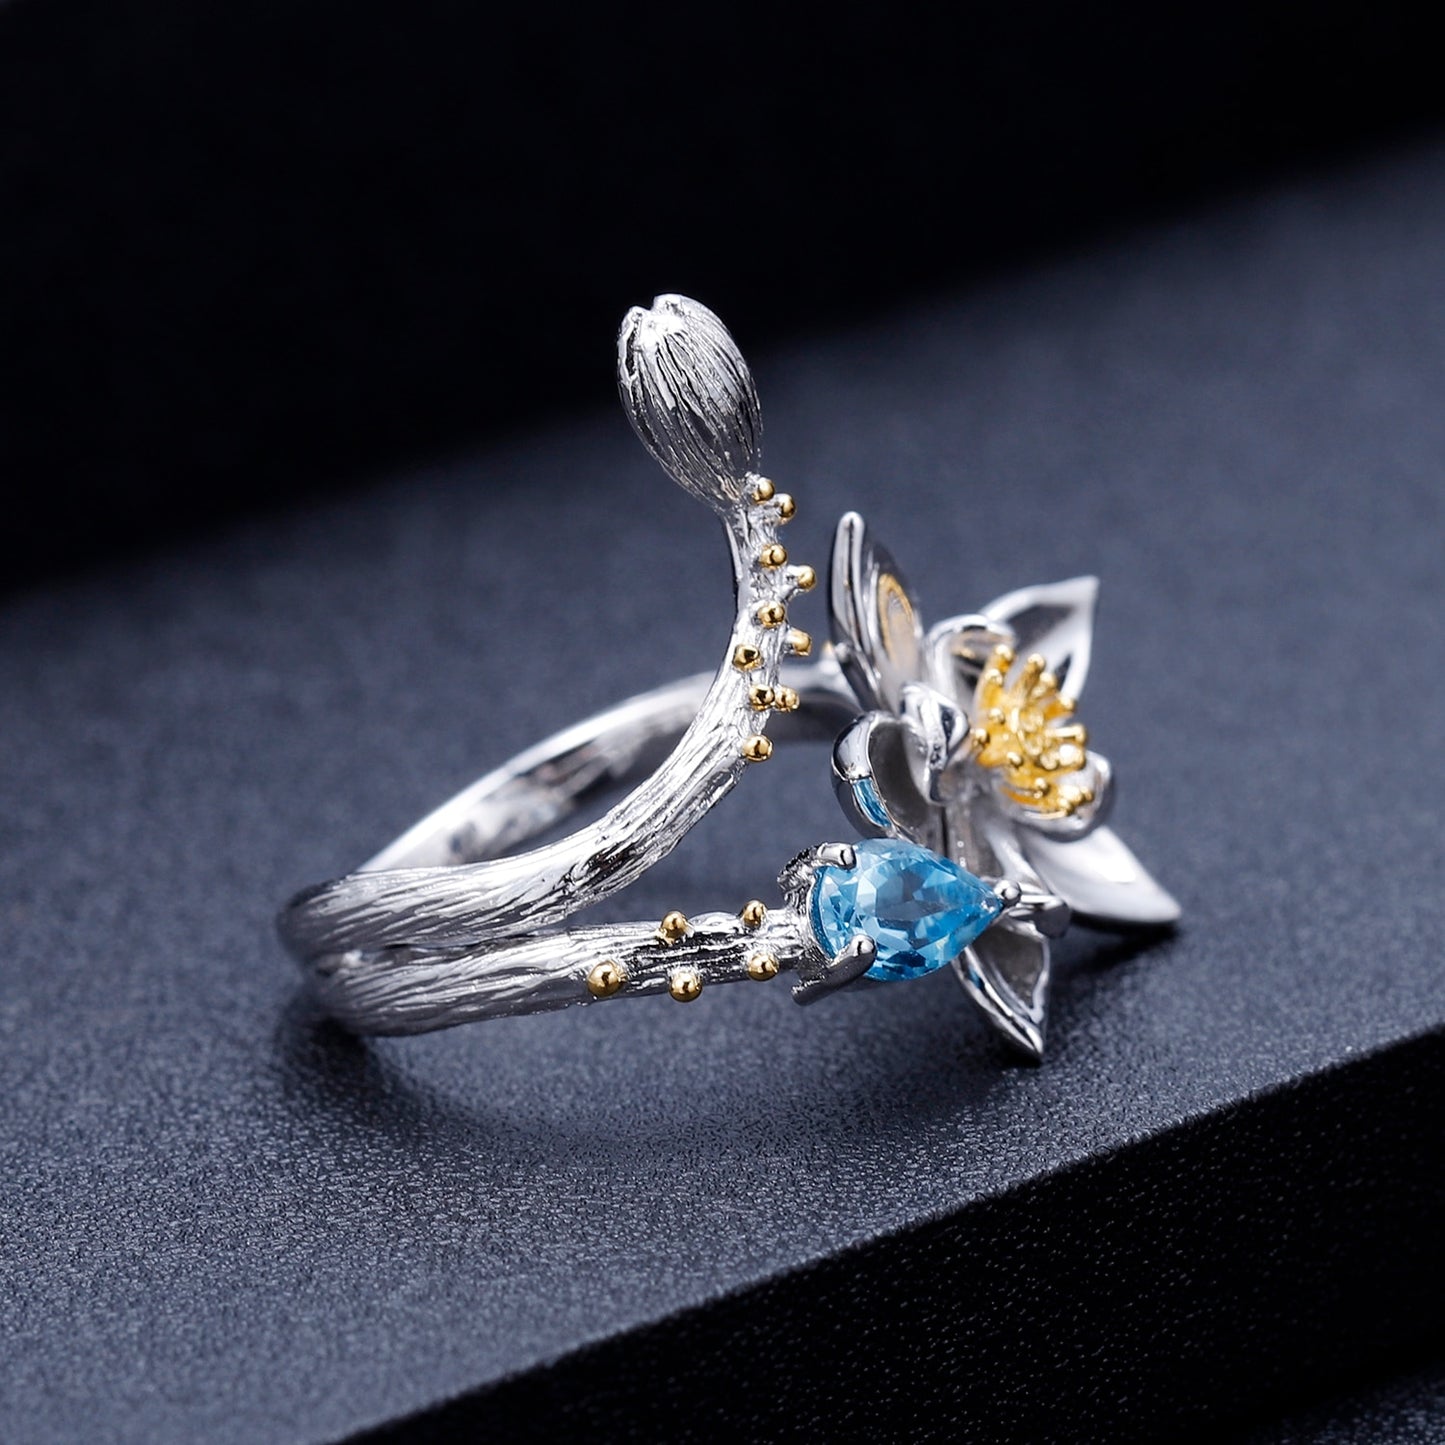 Lotus Flower Ring in 925 Silver and Natural Stone